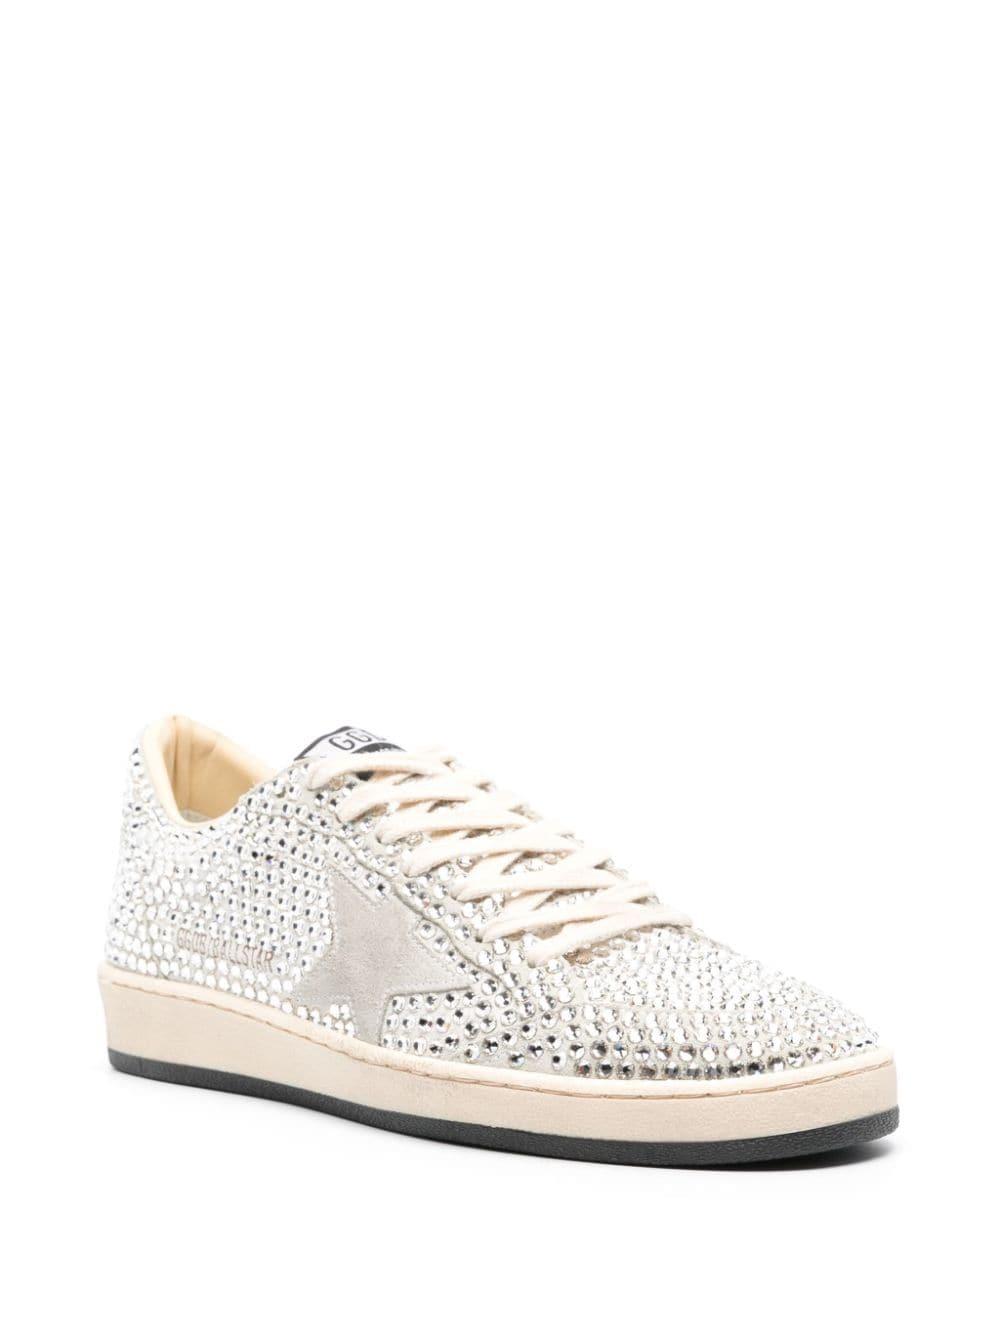 Golden Goose Ball Star Ltd With Swarovski Crystals And Gray Suede Star in  White | Lyst